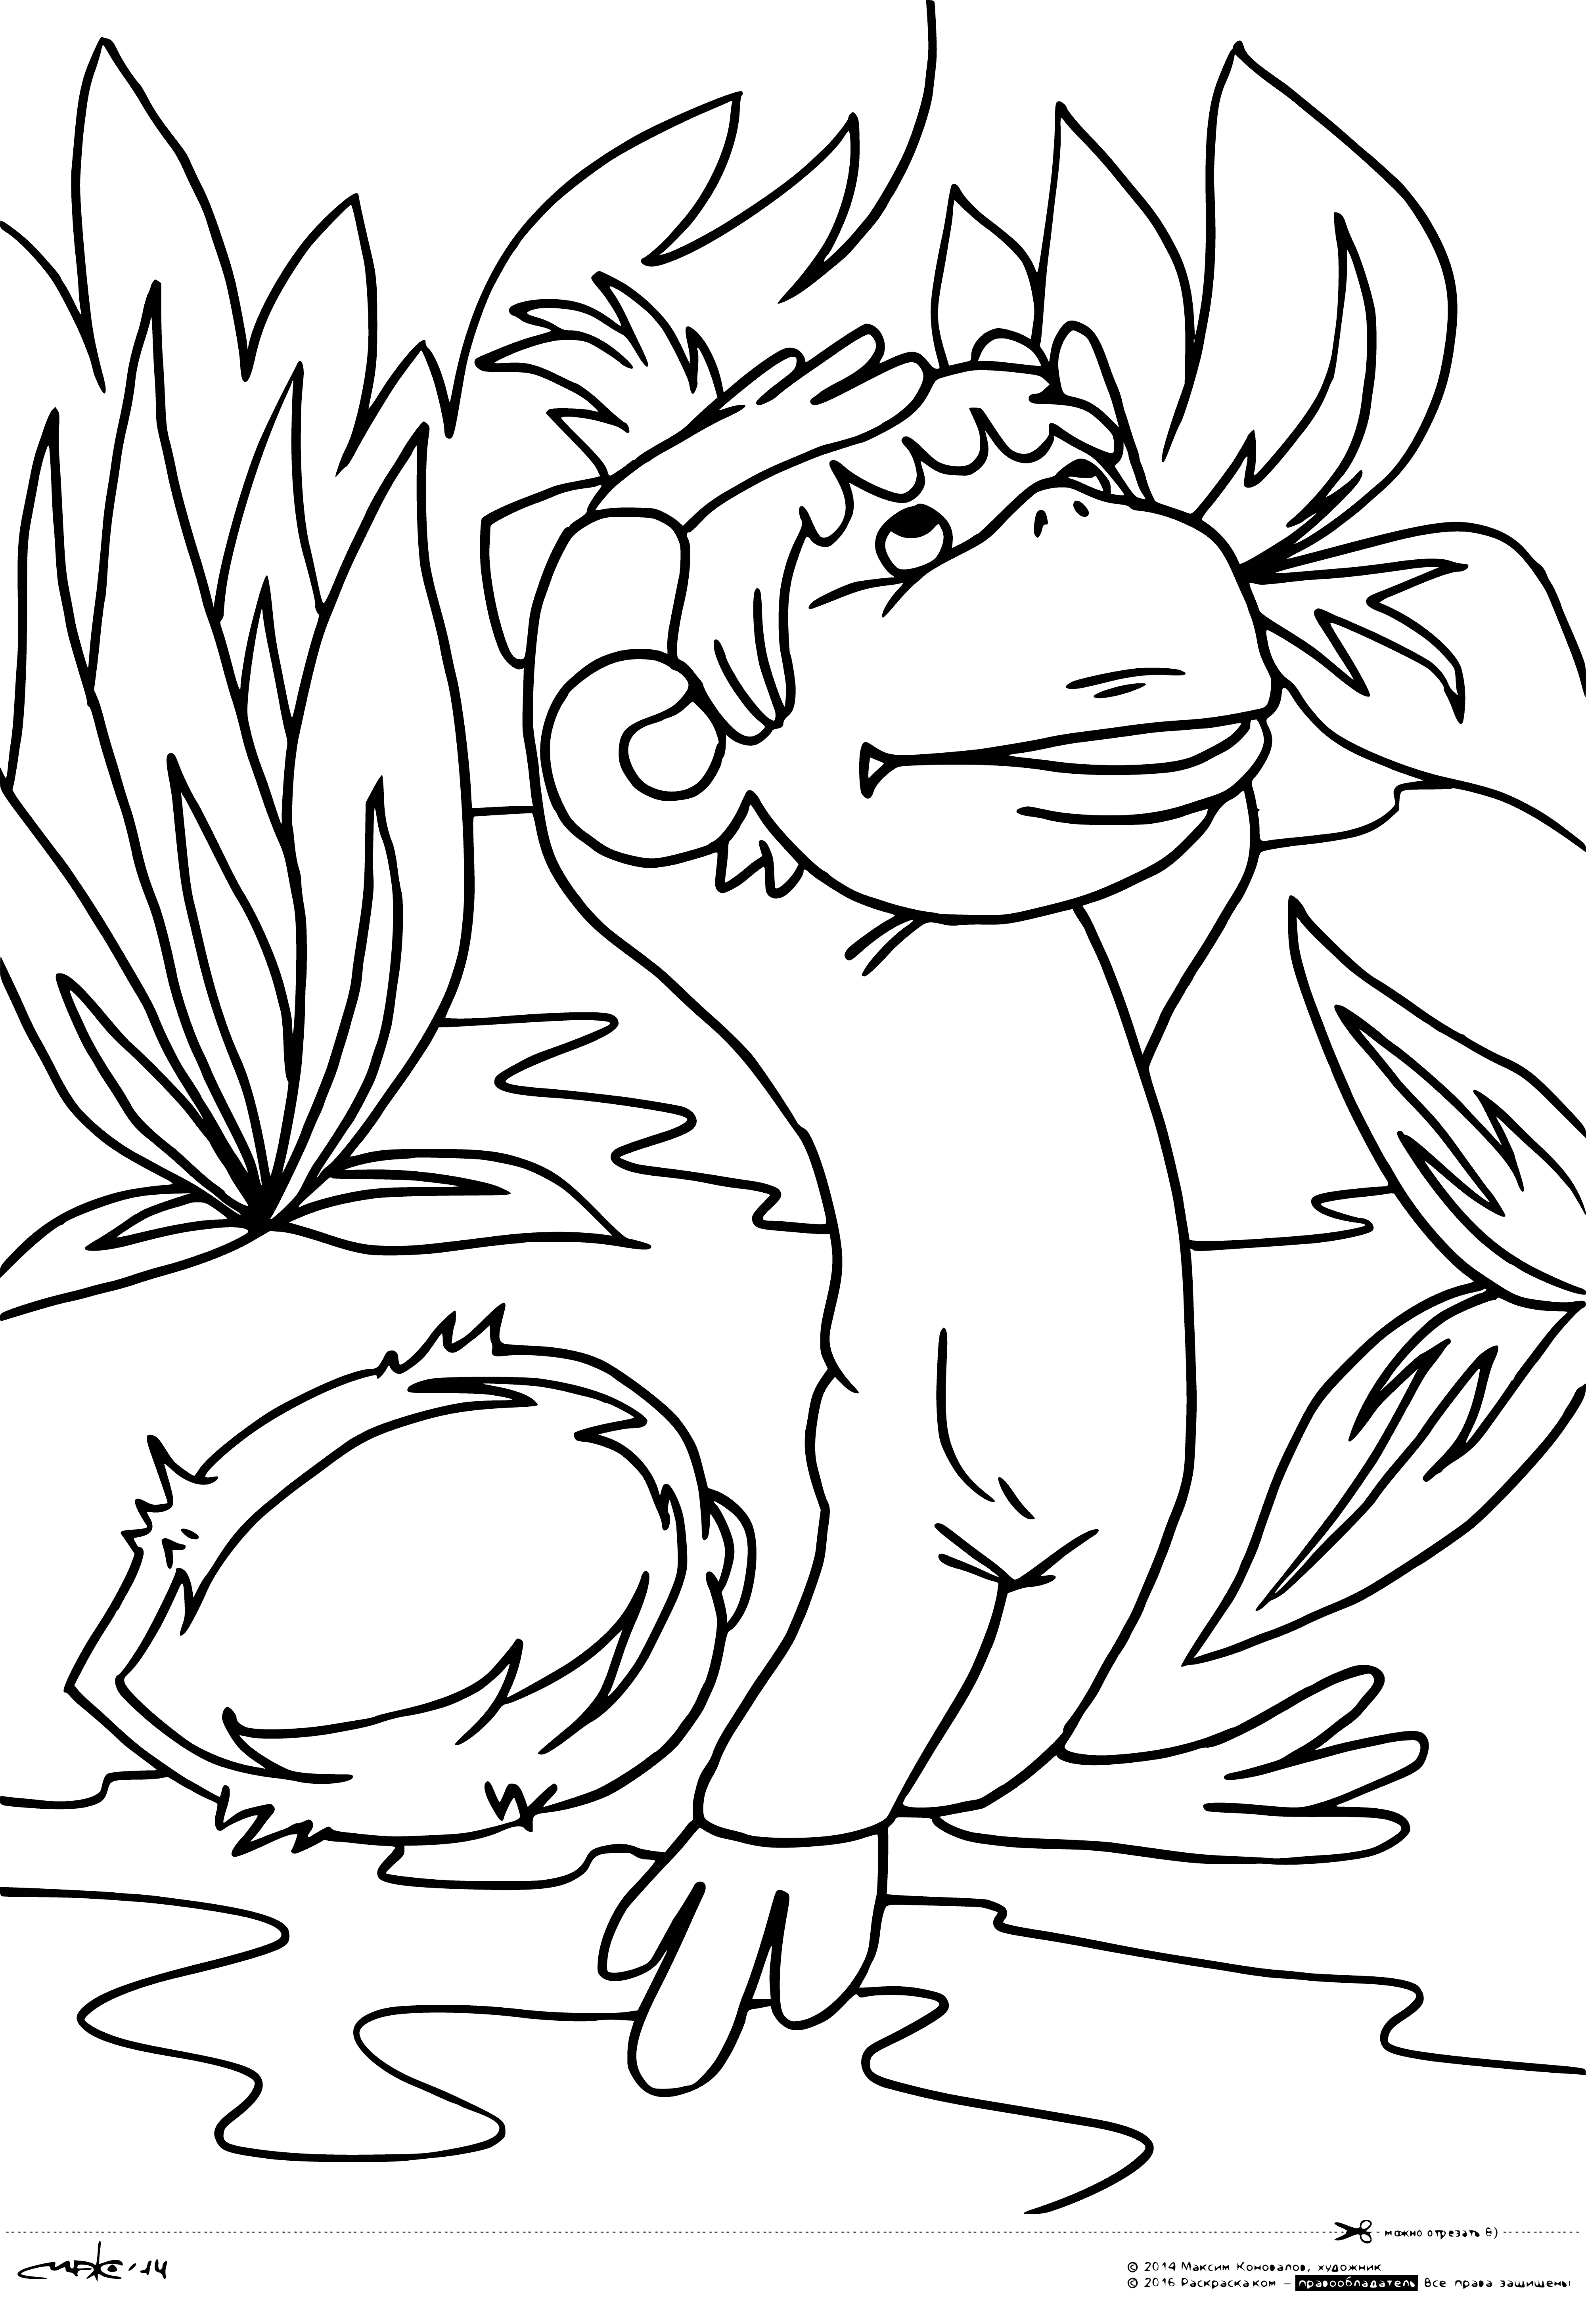 coloring page: 38 parrots: 33 green, 3 yellow, 2 red; 28 have wings outstretched, 10 partially, 7 folded; all have beaks open; 26 looking left, 8 right, 4 straight ahead.